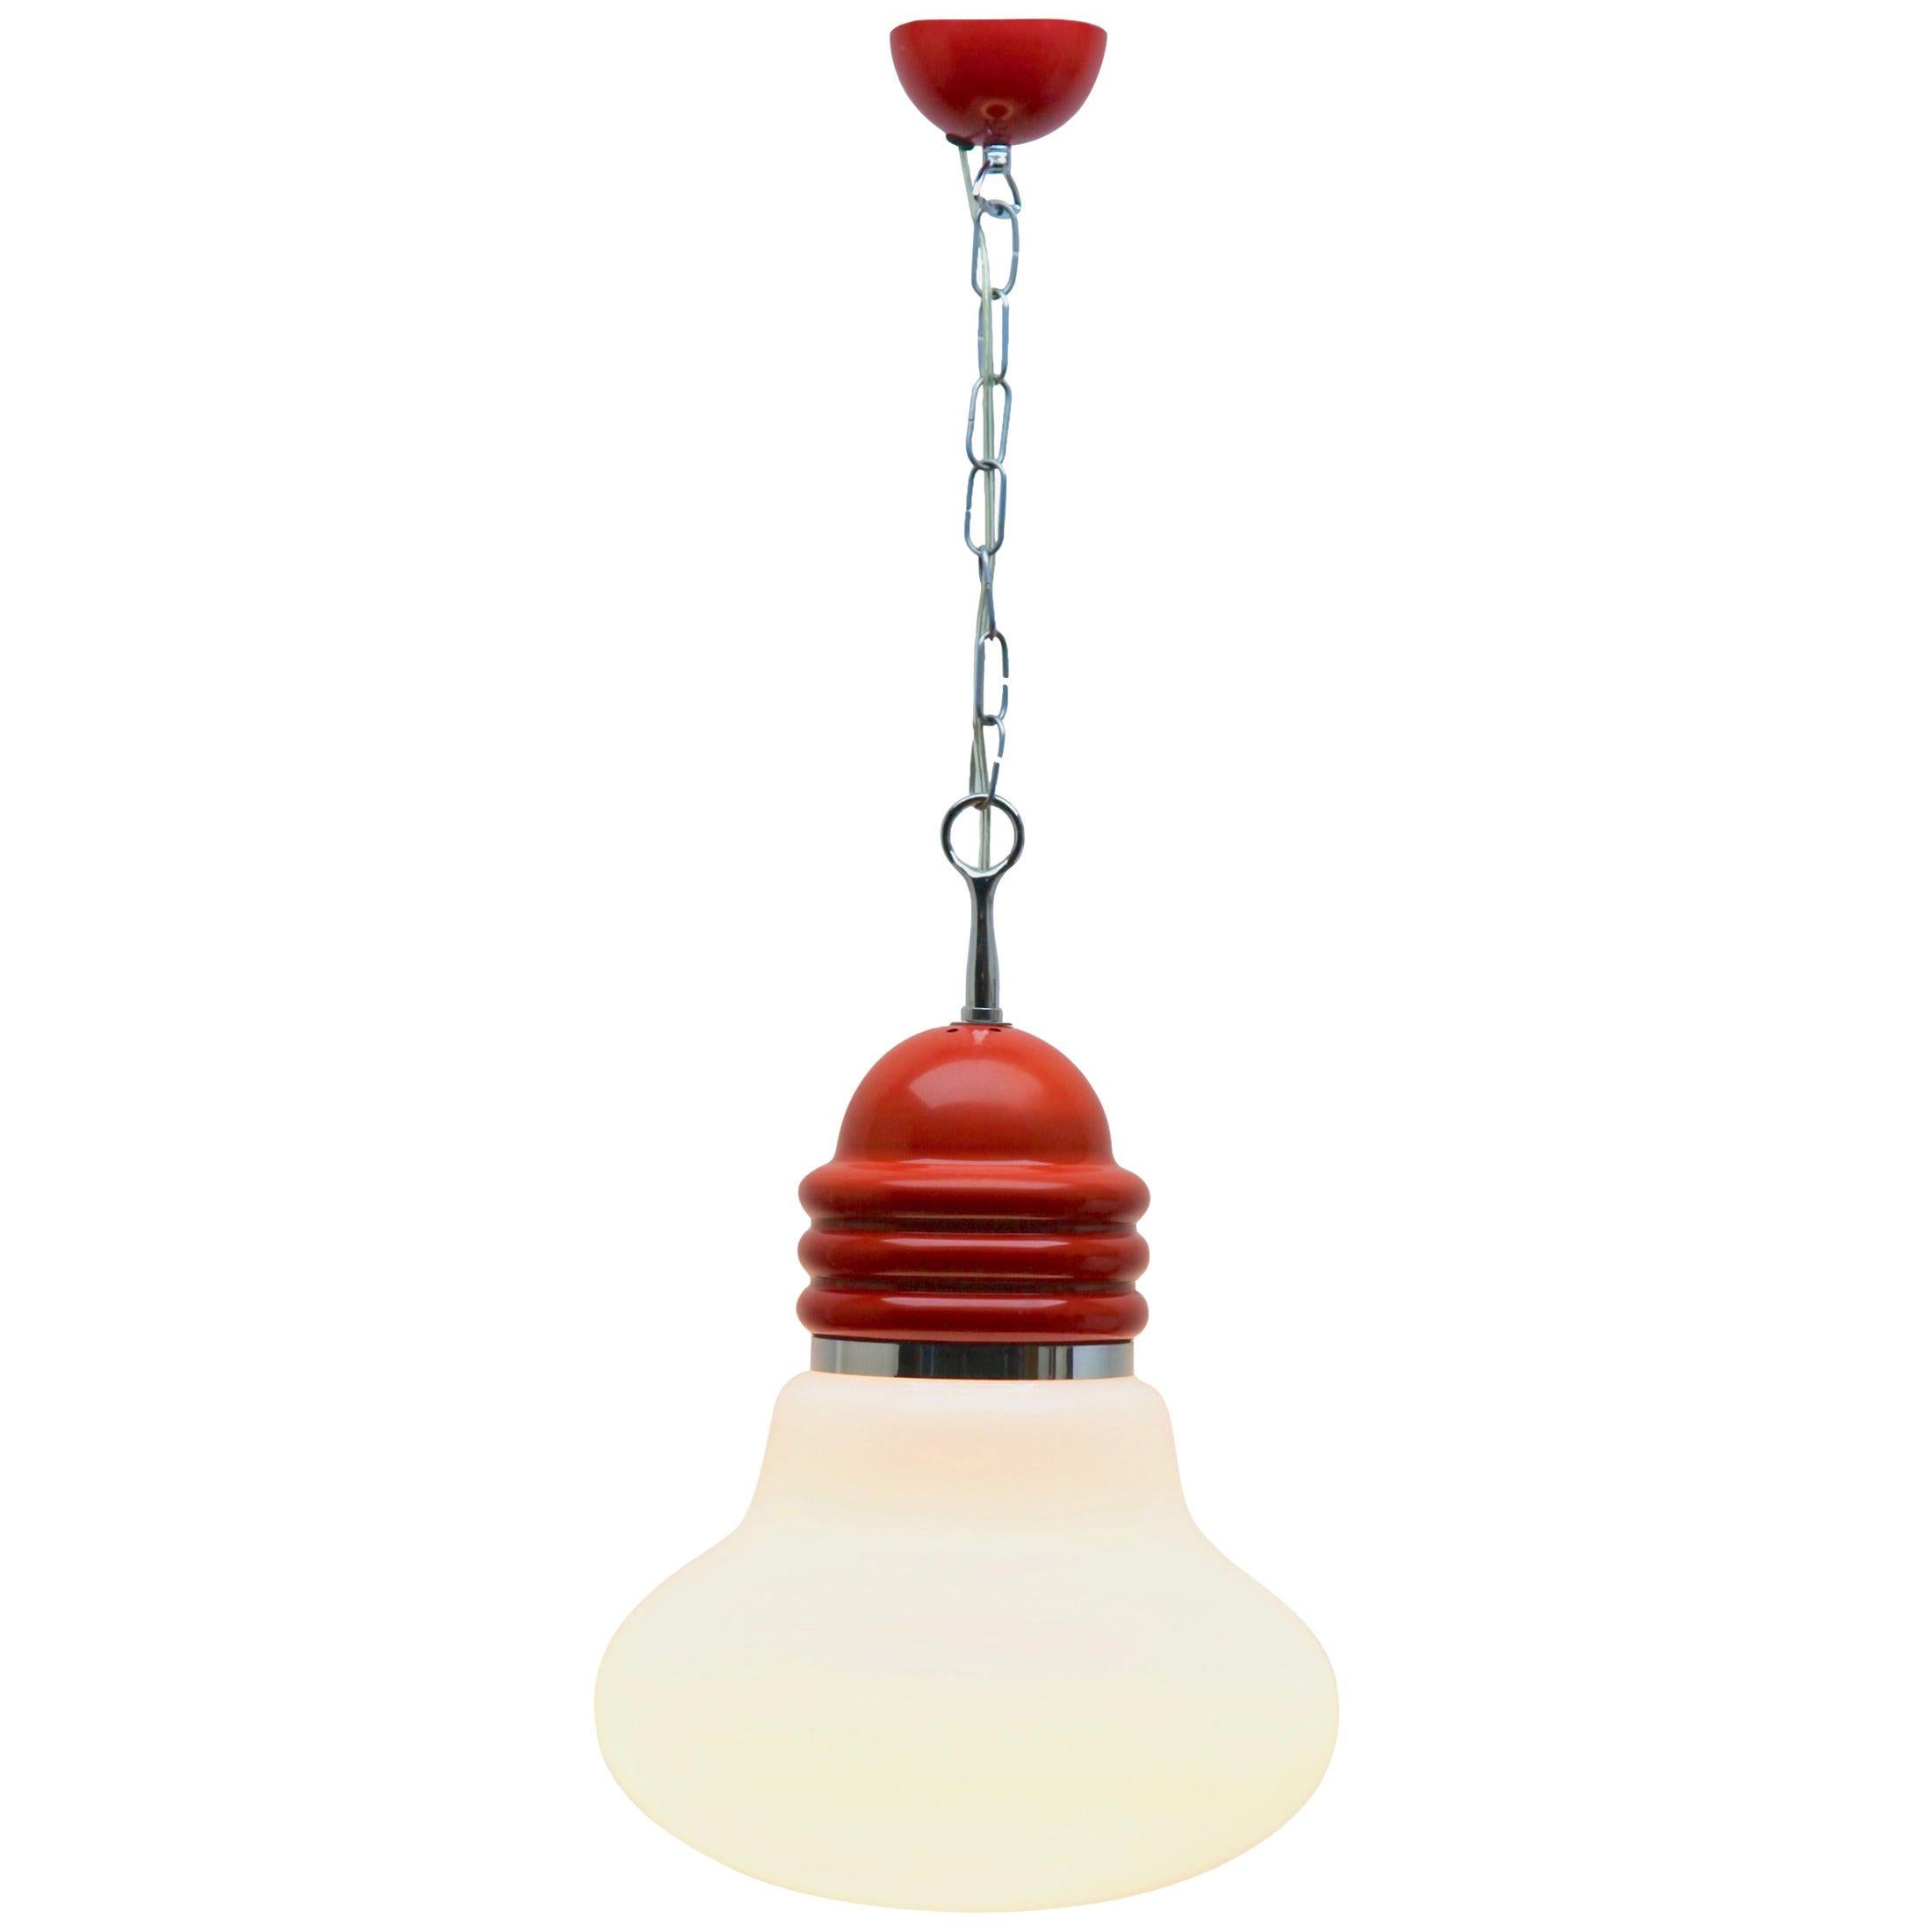 Vintage Pendant Ceiling Light in the Schape of a Big Bulb, Opaque Glass, 1960s